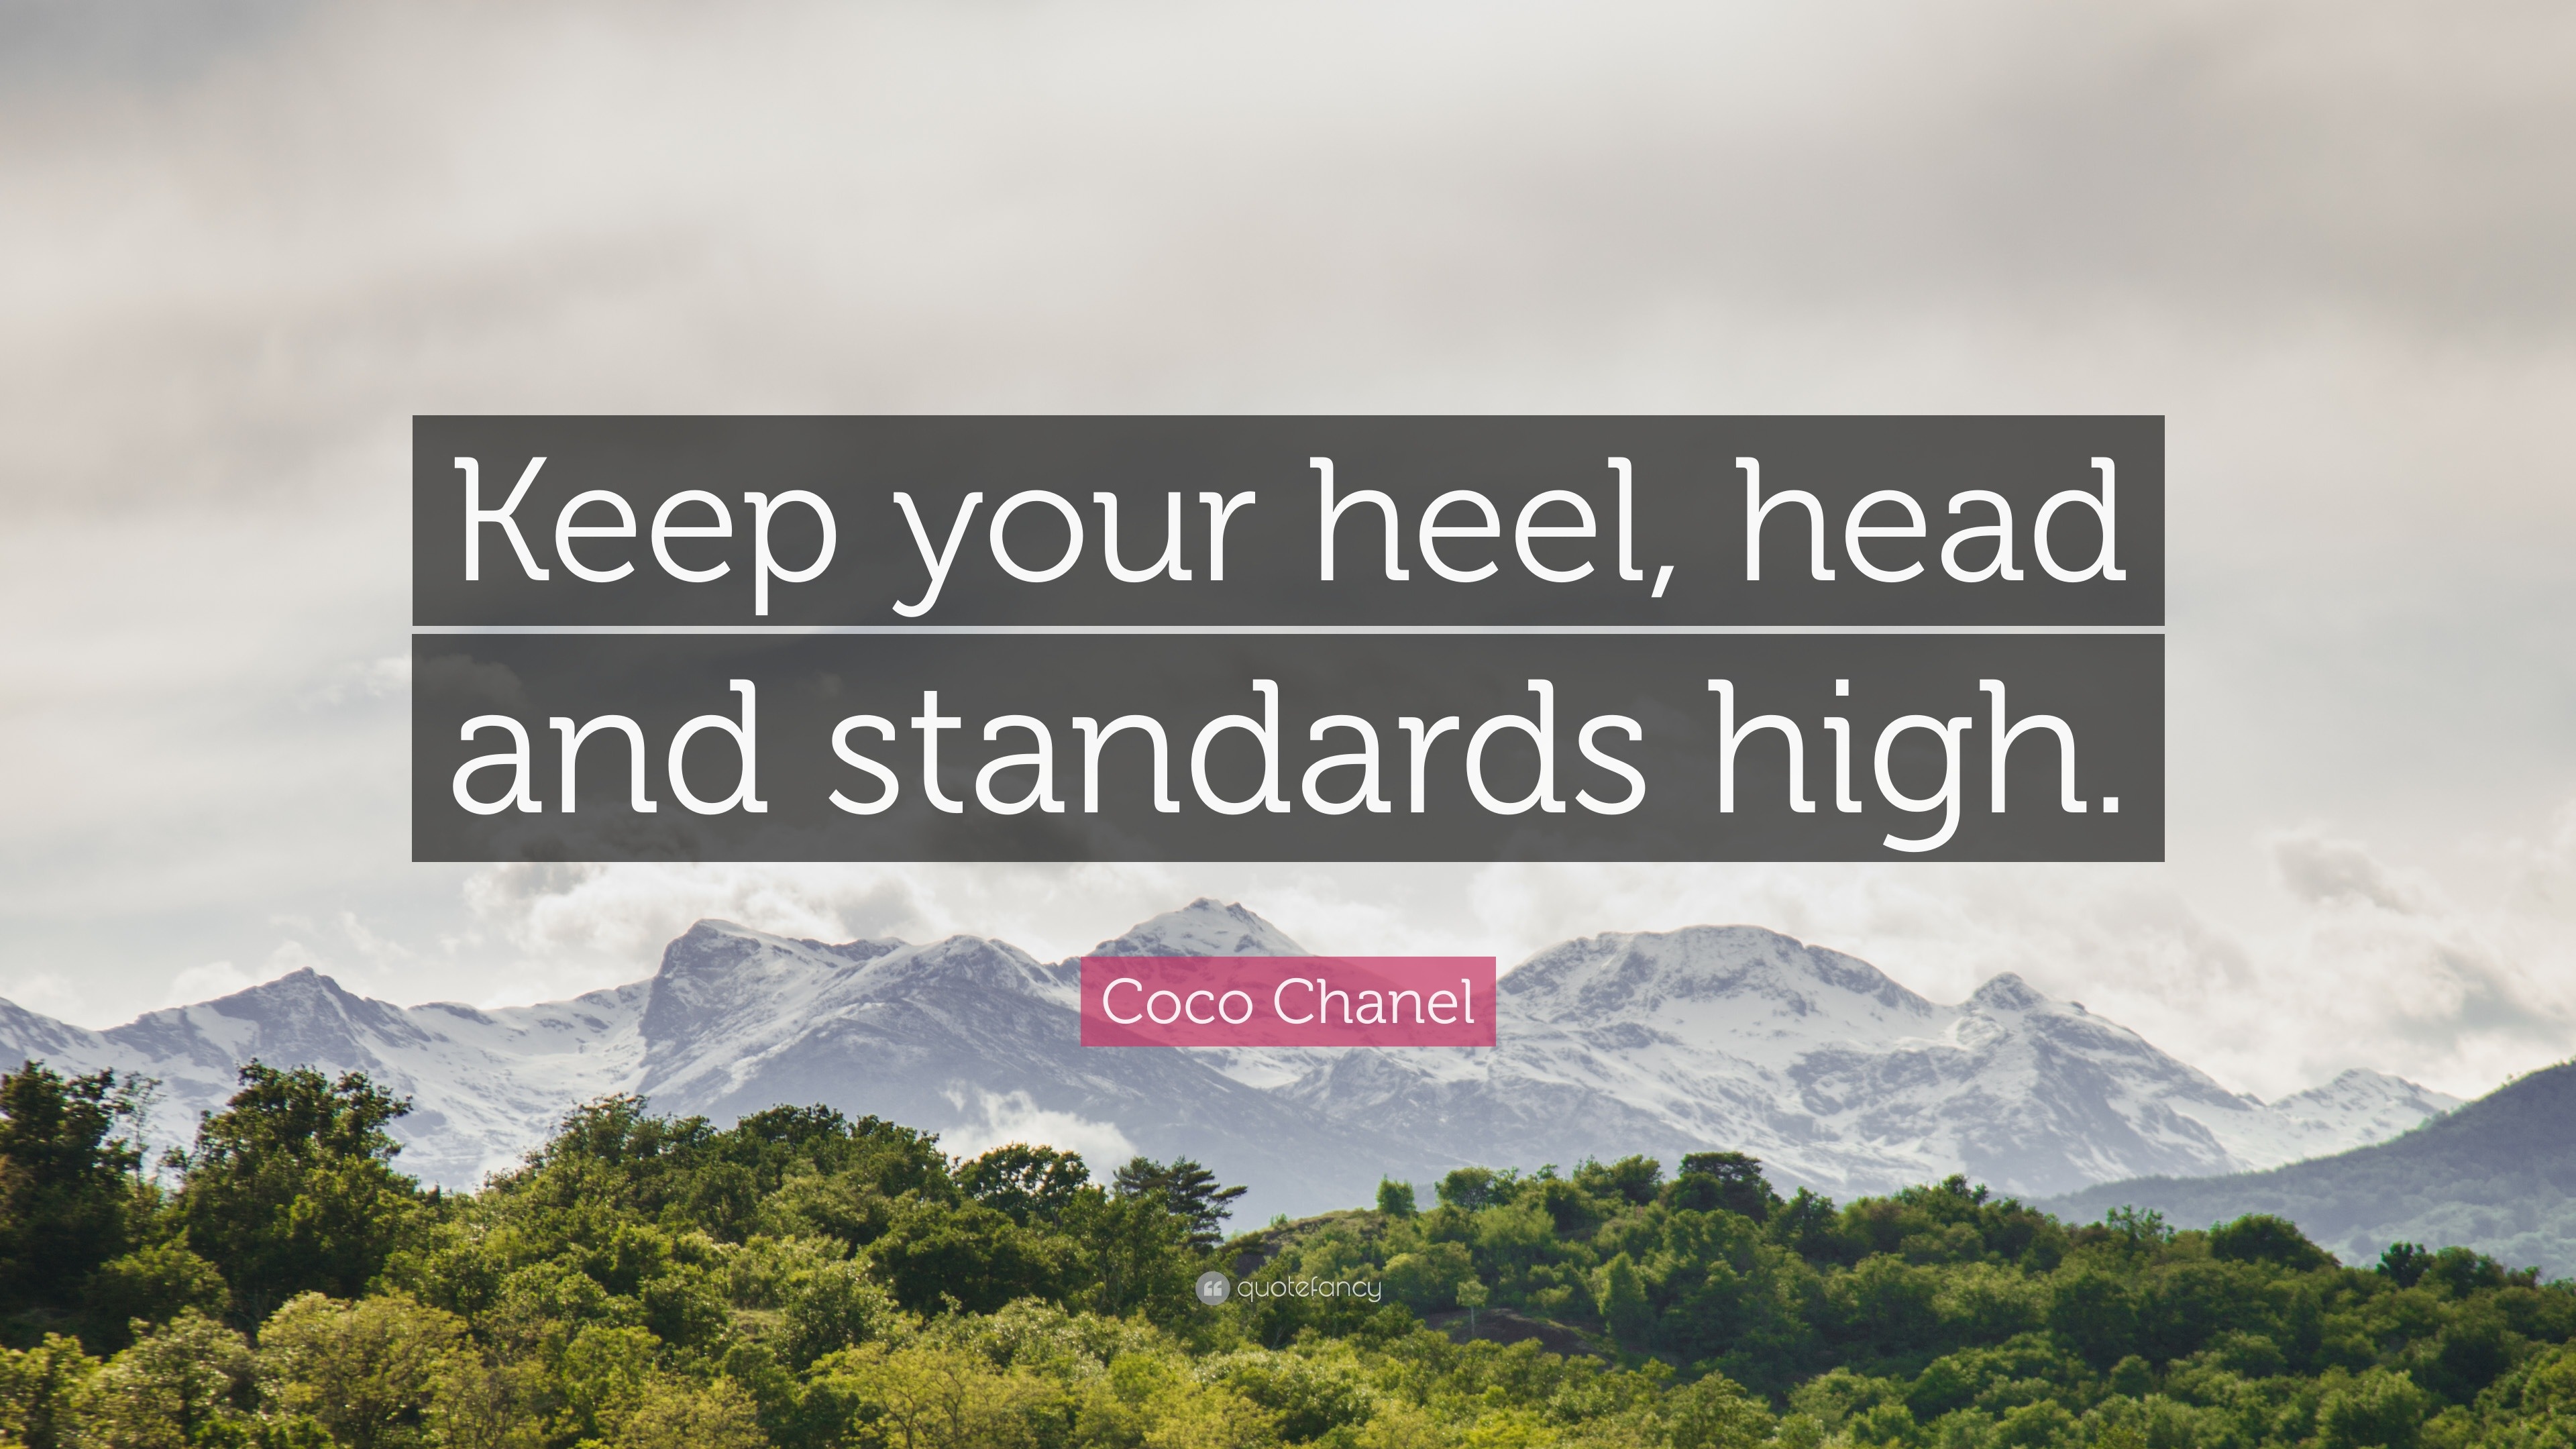 Coco Chanel Quote: “Keep your heel, head and standards high.”